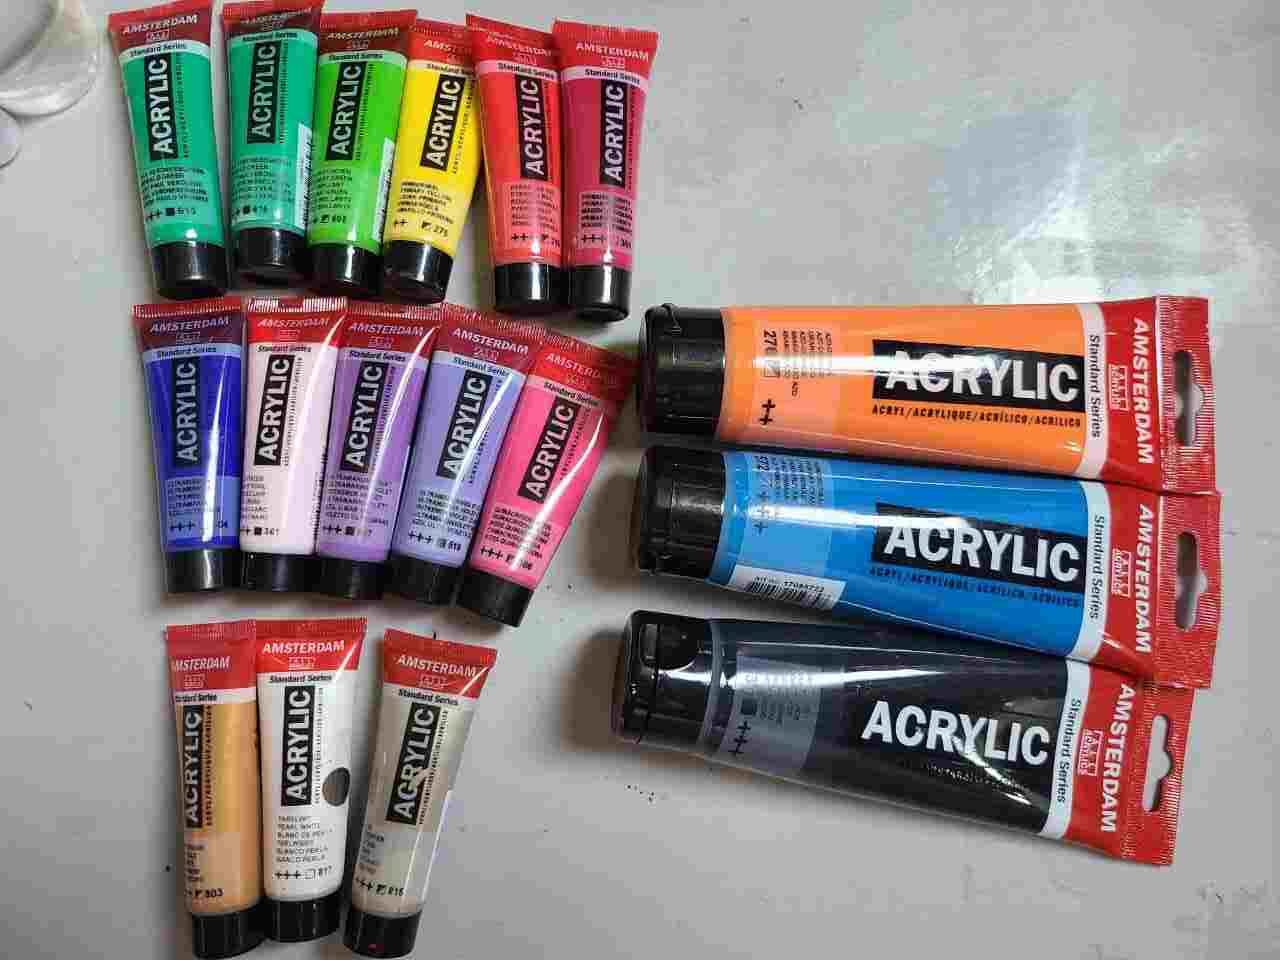 Amsterdam Acrylic Paint Review